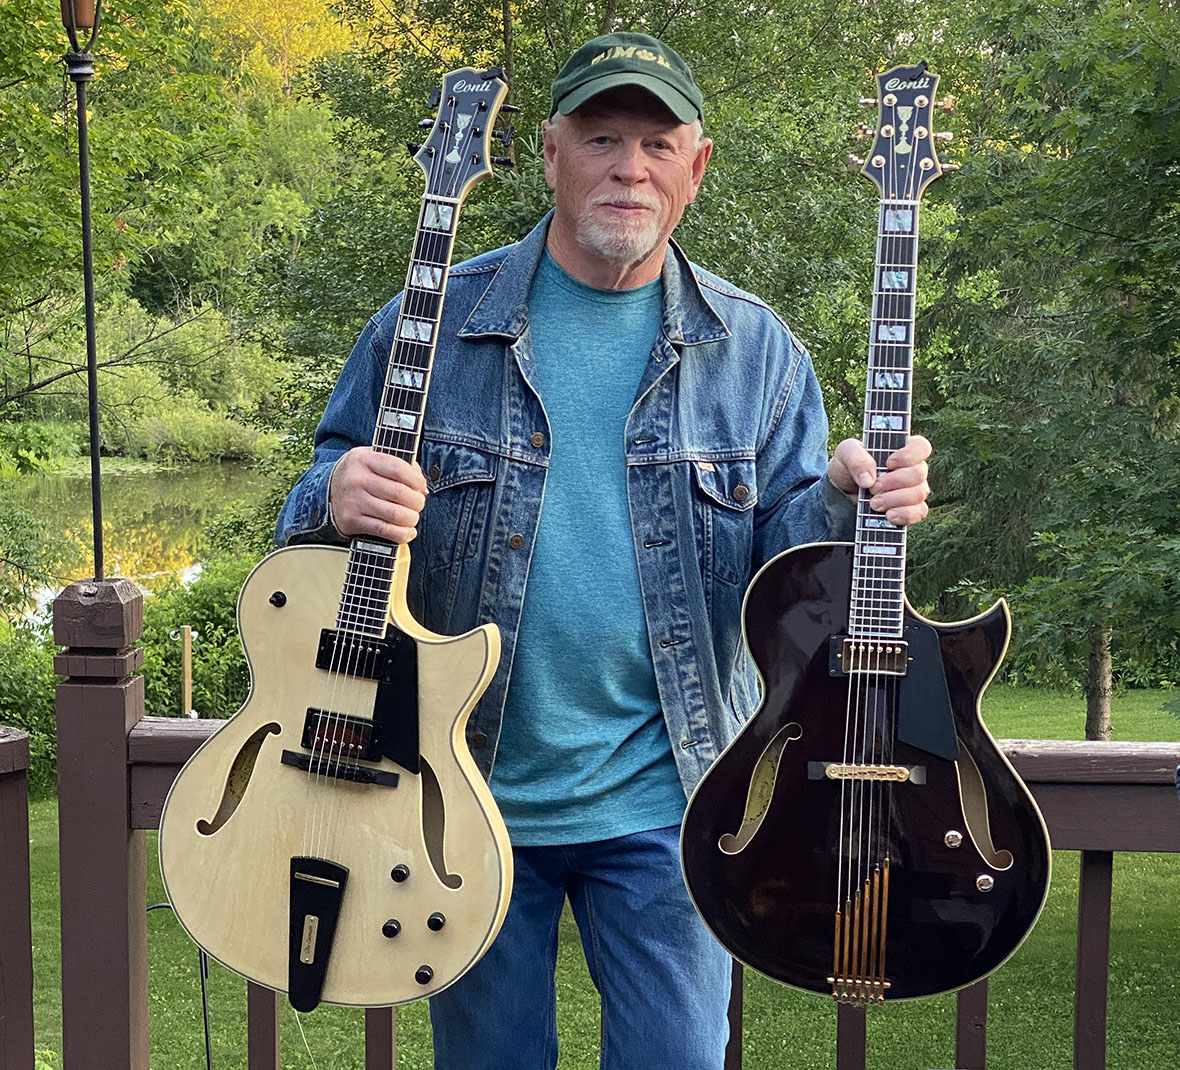 Jack Marchewka joins the Two Conti Club with the acquisition of his second Entrada archtop jazz guitar!